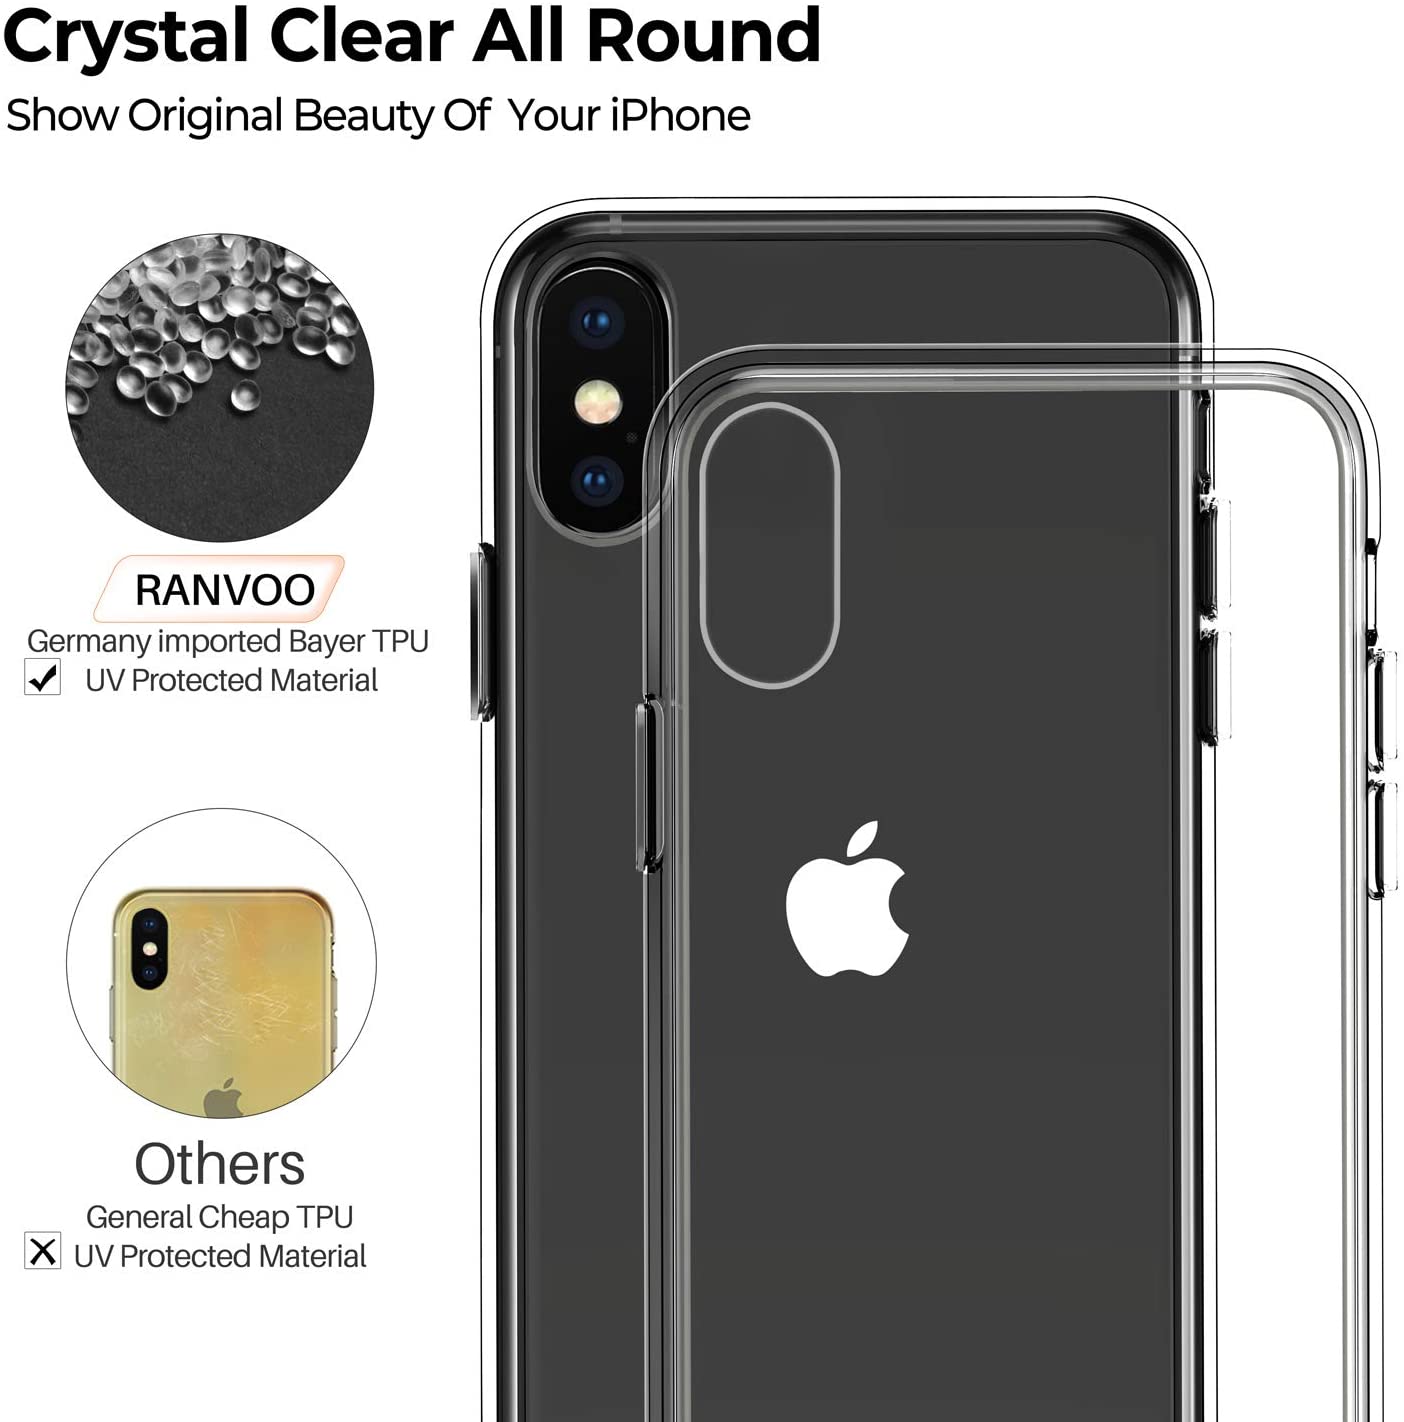 RANVOO iPhone Xs case, iPhone X case Protective Clear Case [Certified Military Protection] [Agile Button] with Reinforced Soft TPU Bumper and Transparent Hard PC Back Case (Crystal Clear)